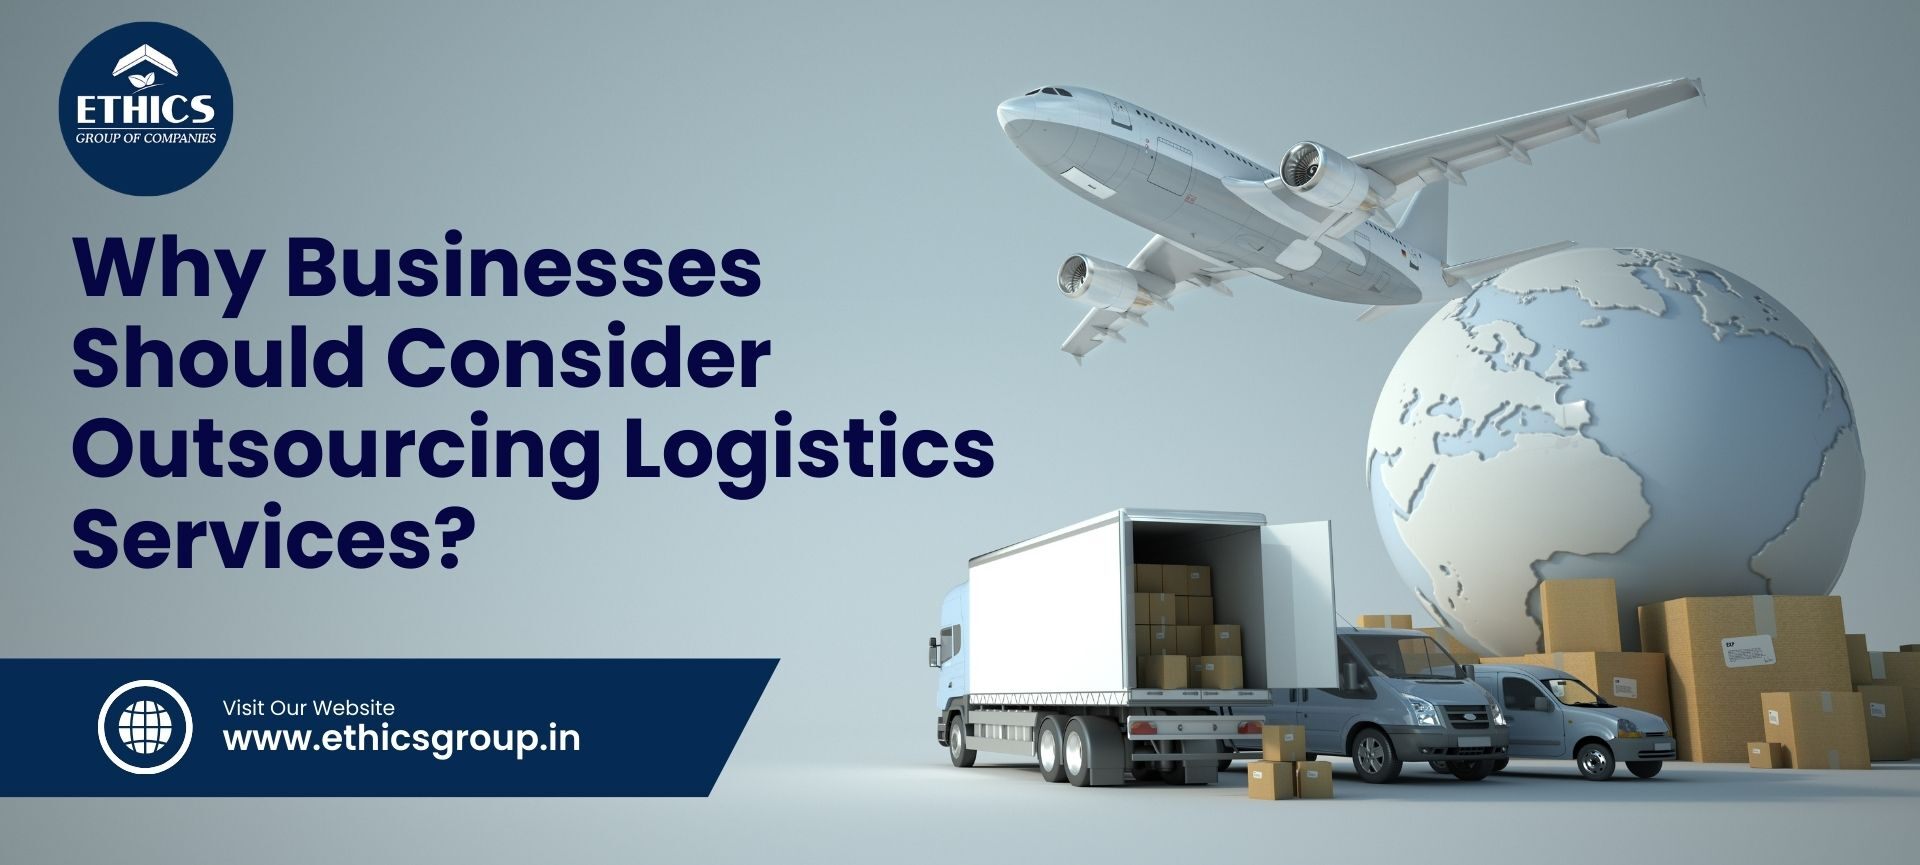 outsourcing logistics services in india